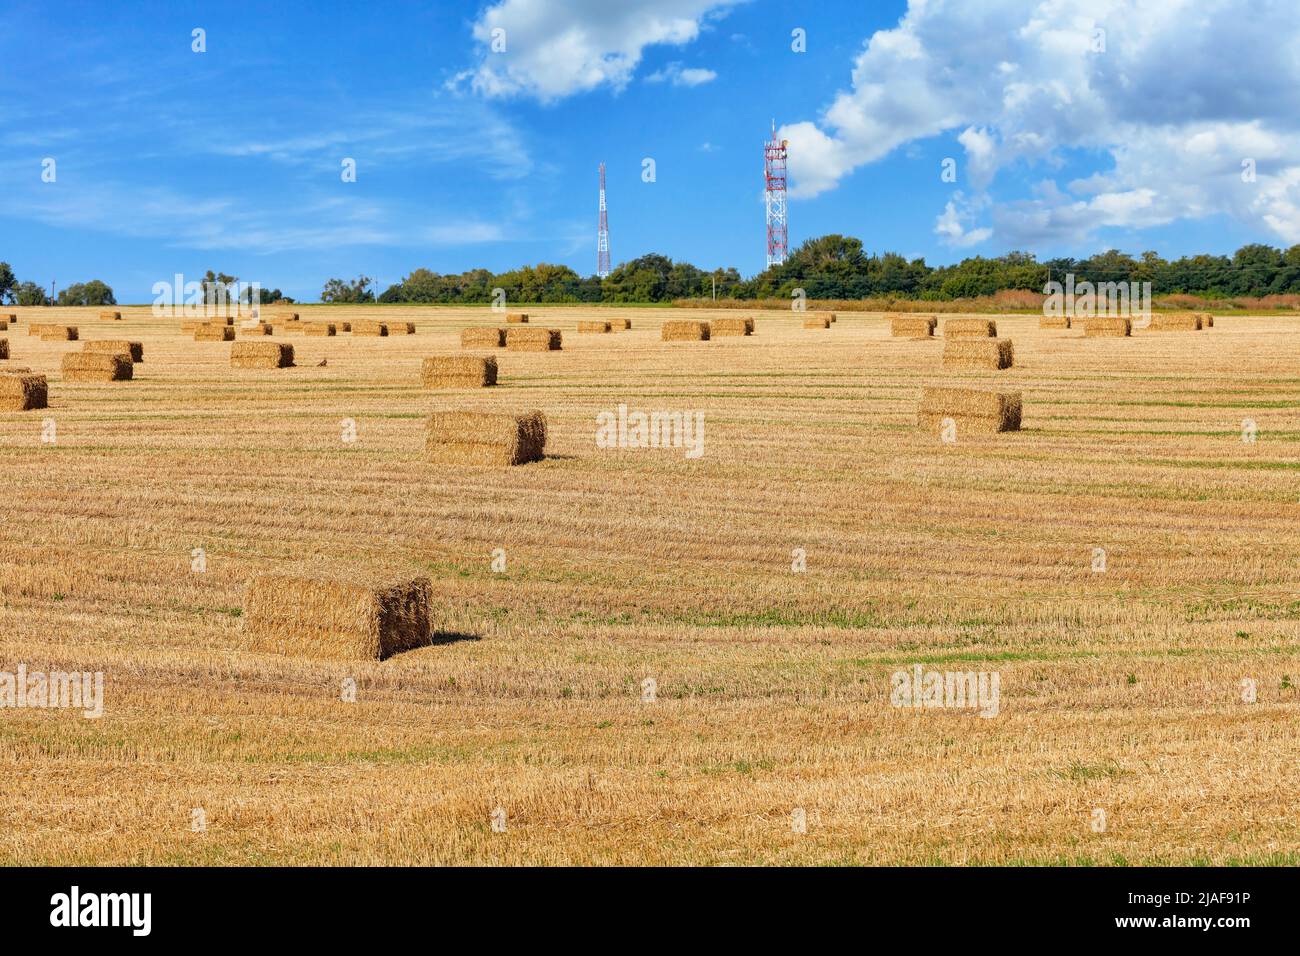 Large rectangular bales of straw on the stubble of an agricultural field against a blue cloudy sky and cell towers on the horizon. Copy space. Stock Photo